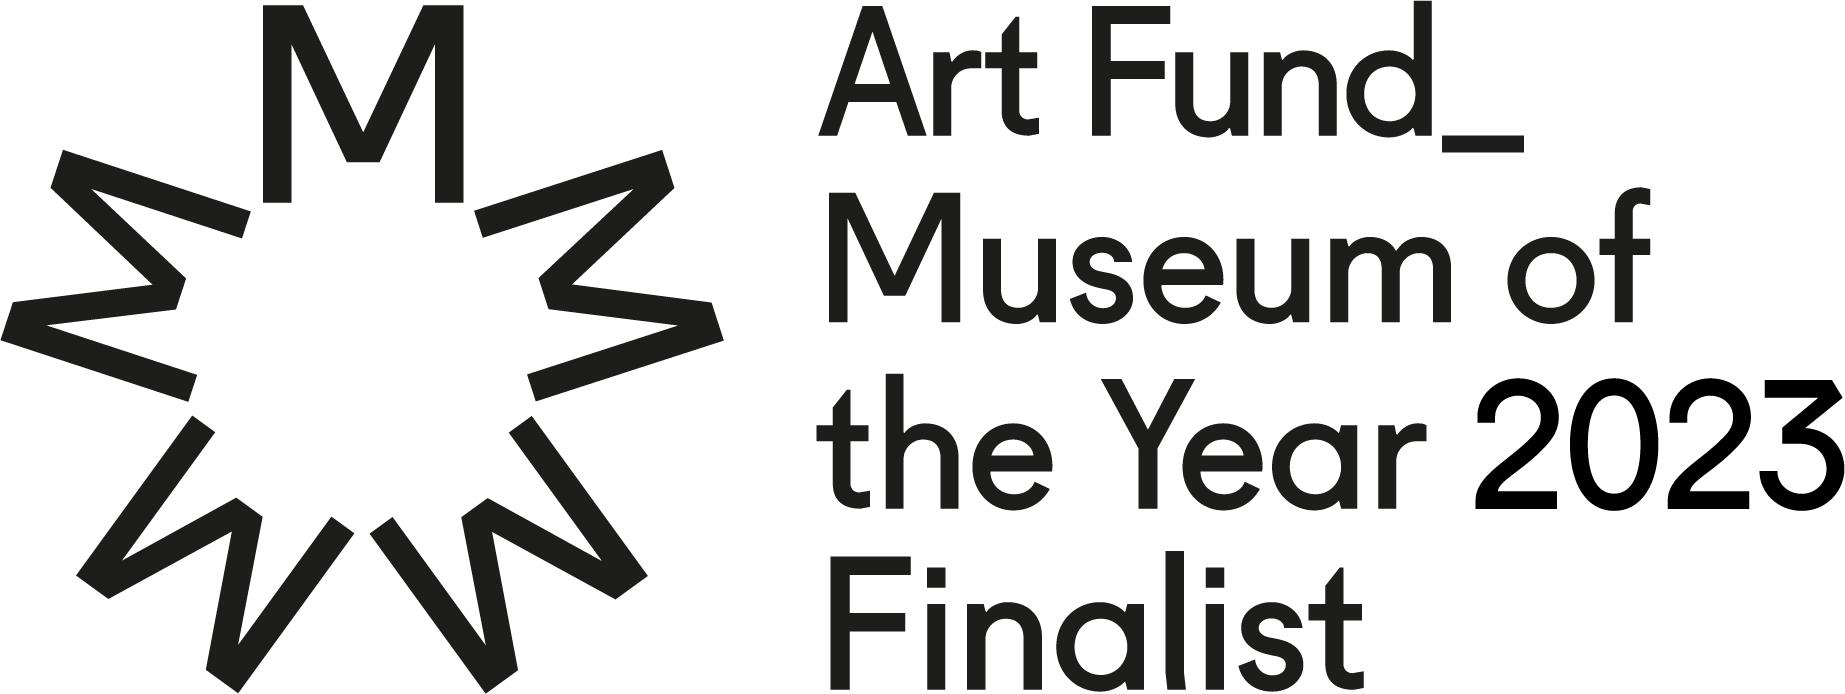 Art Fund Museum of the Year 2023 Finalist logo